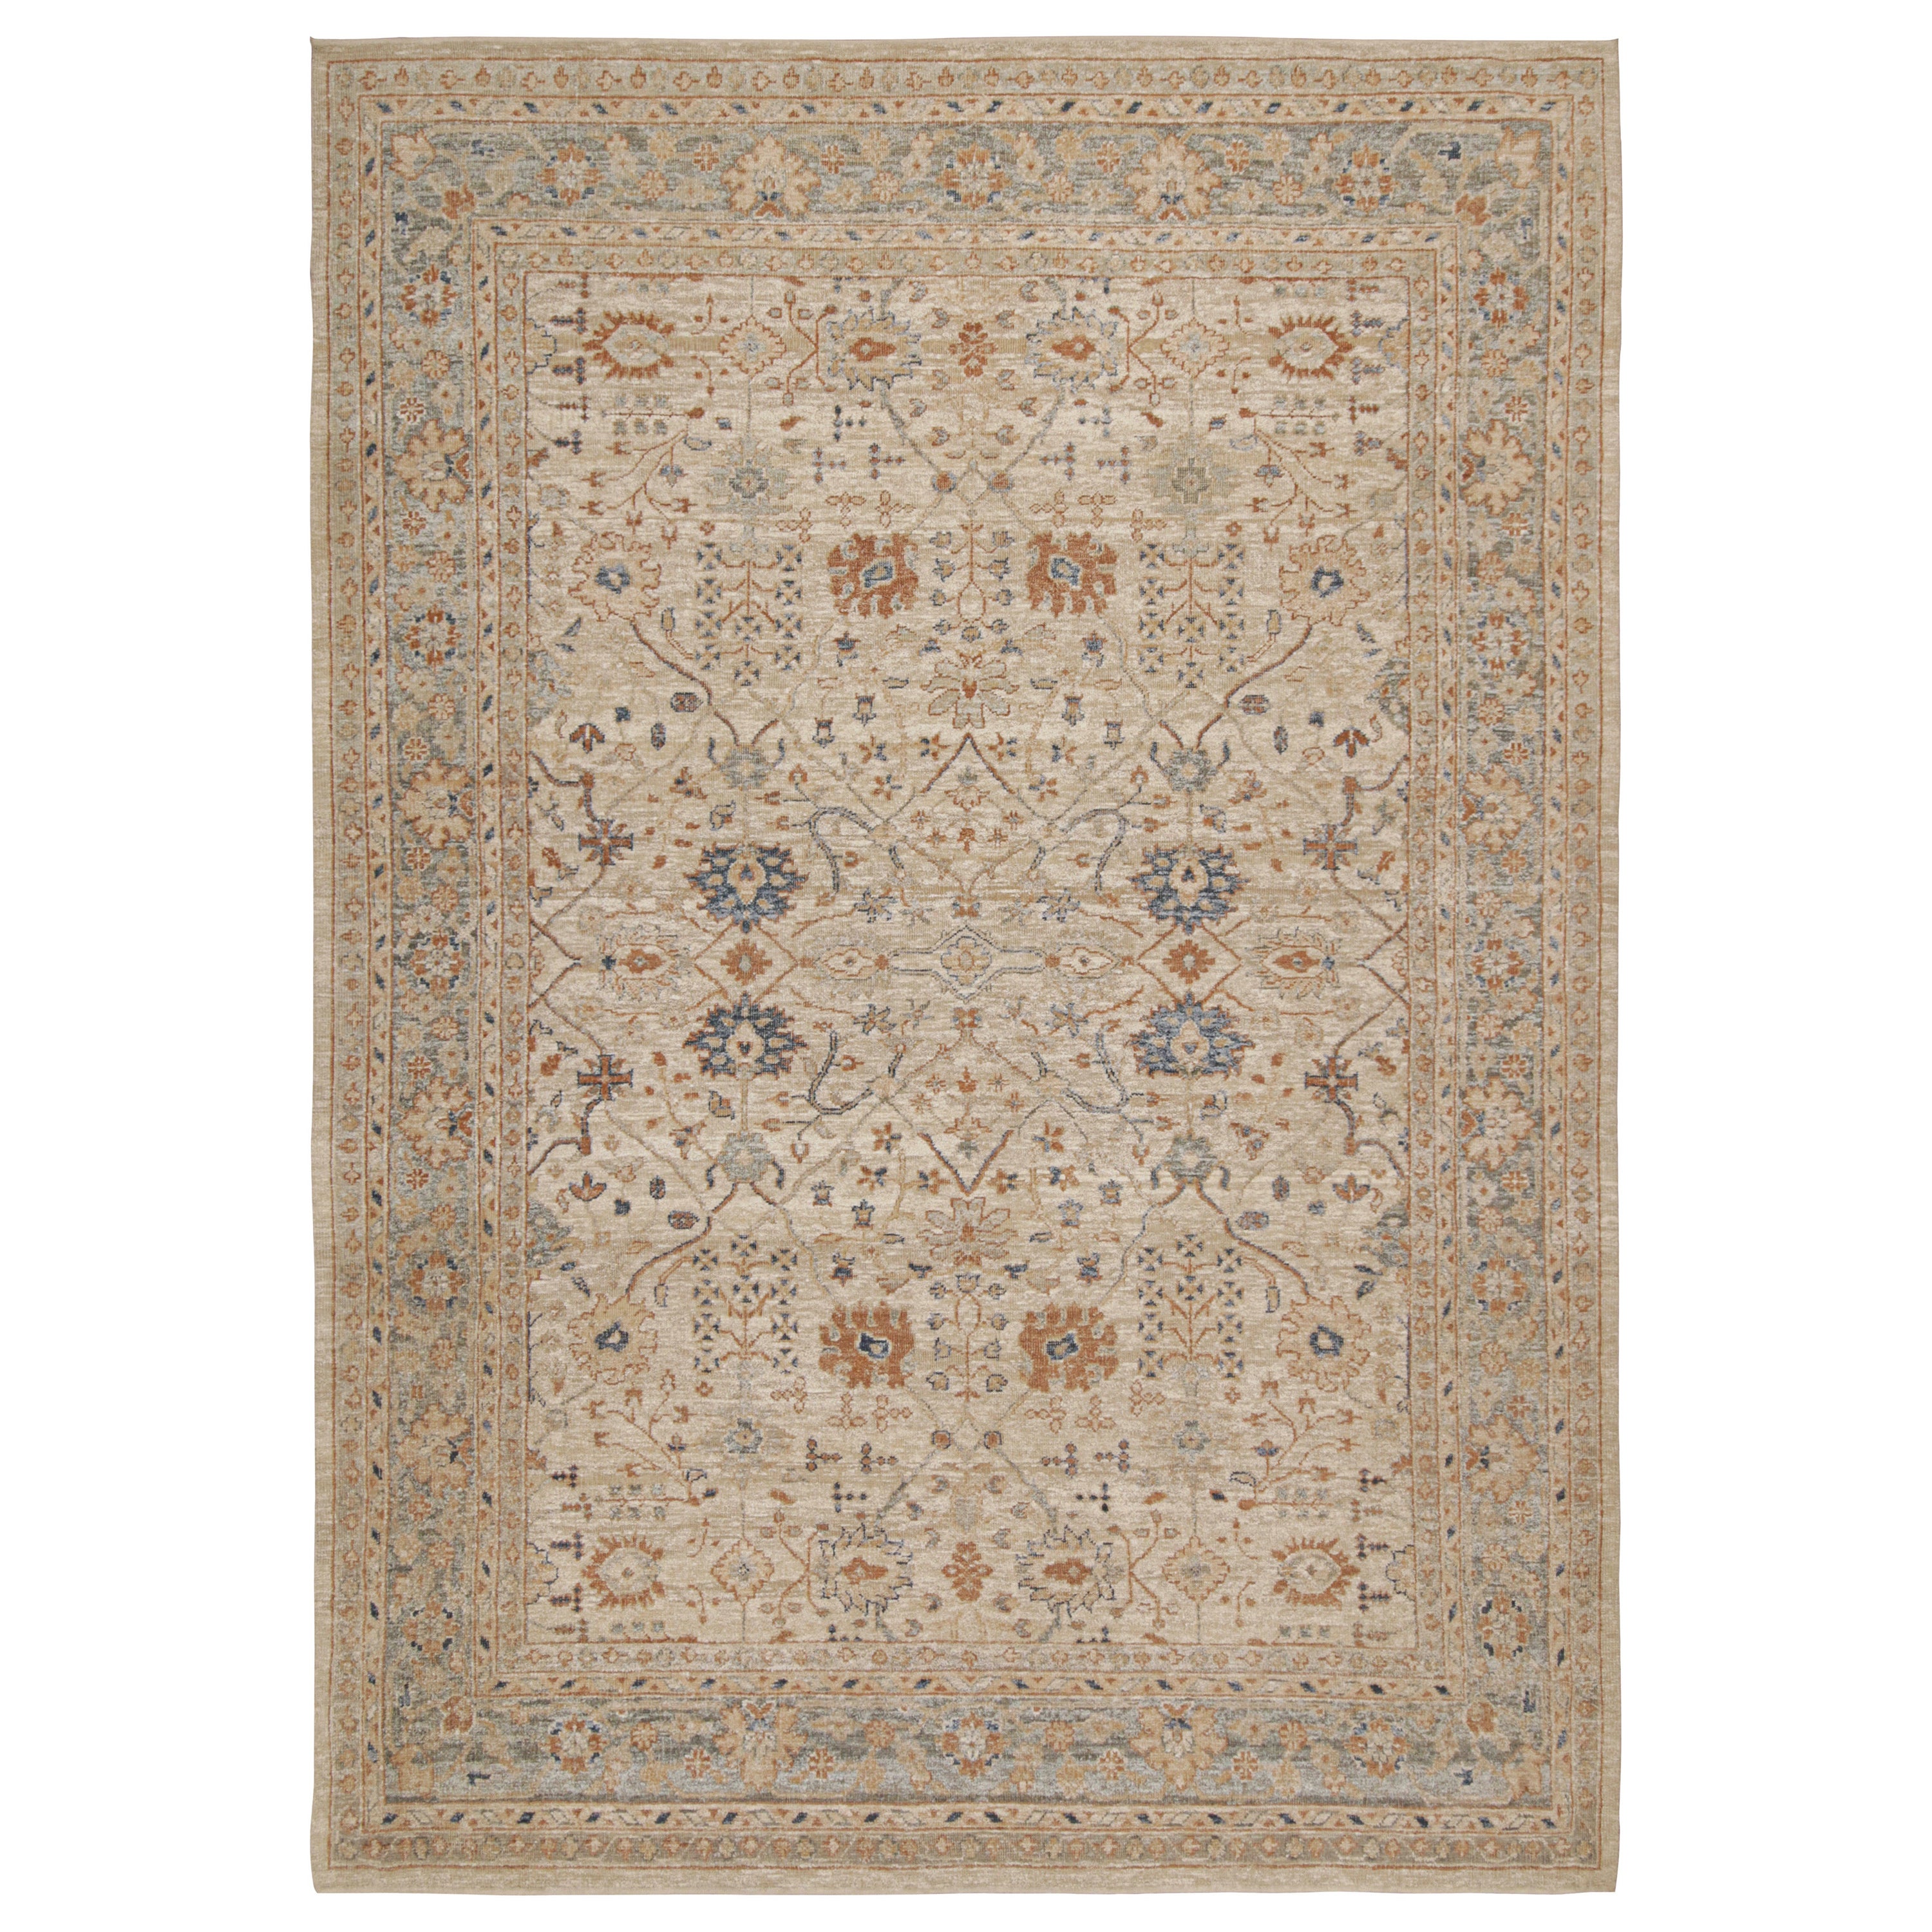 Rug & Kilim’s Oushak Style Rug in Cream, Blue, Beige-Brown Geometric Patterns For Sale